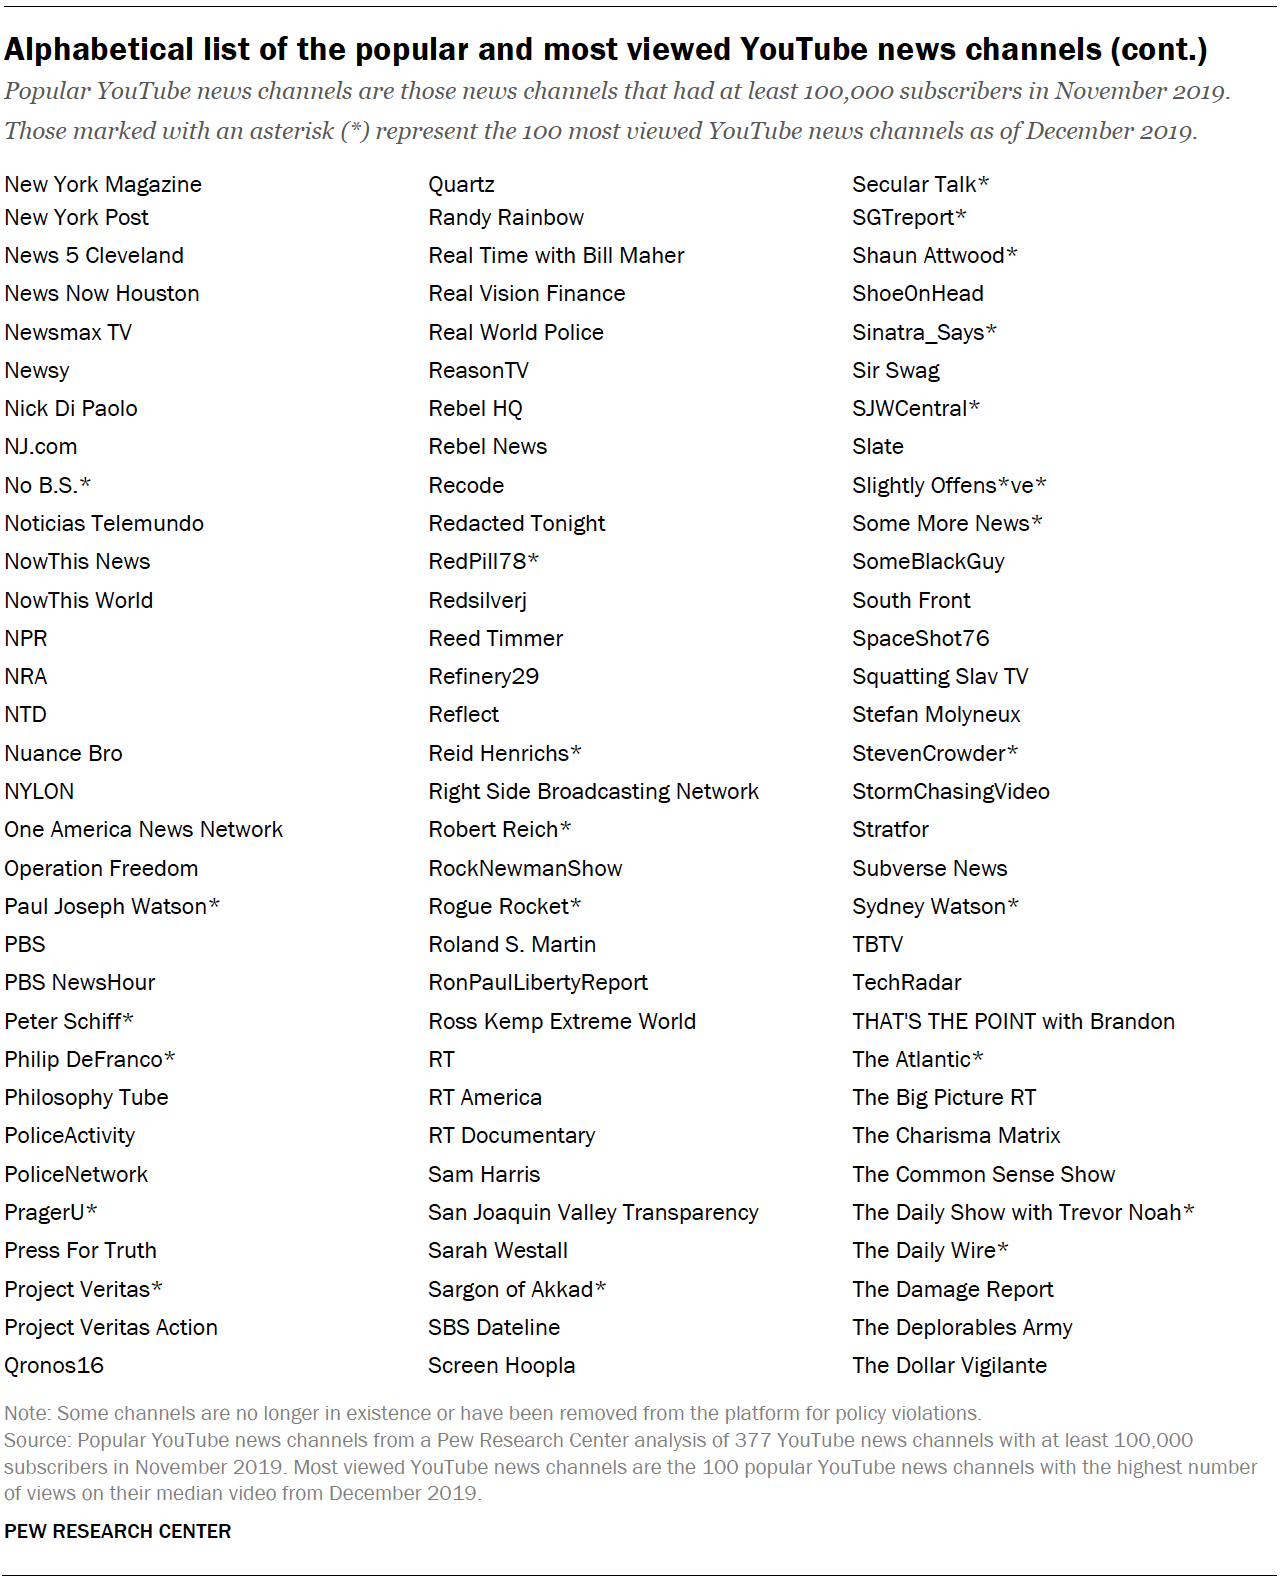 Alphabetical list of the popular and most viewed YouTube news channels